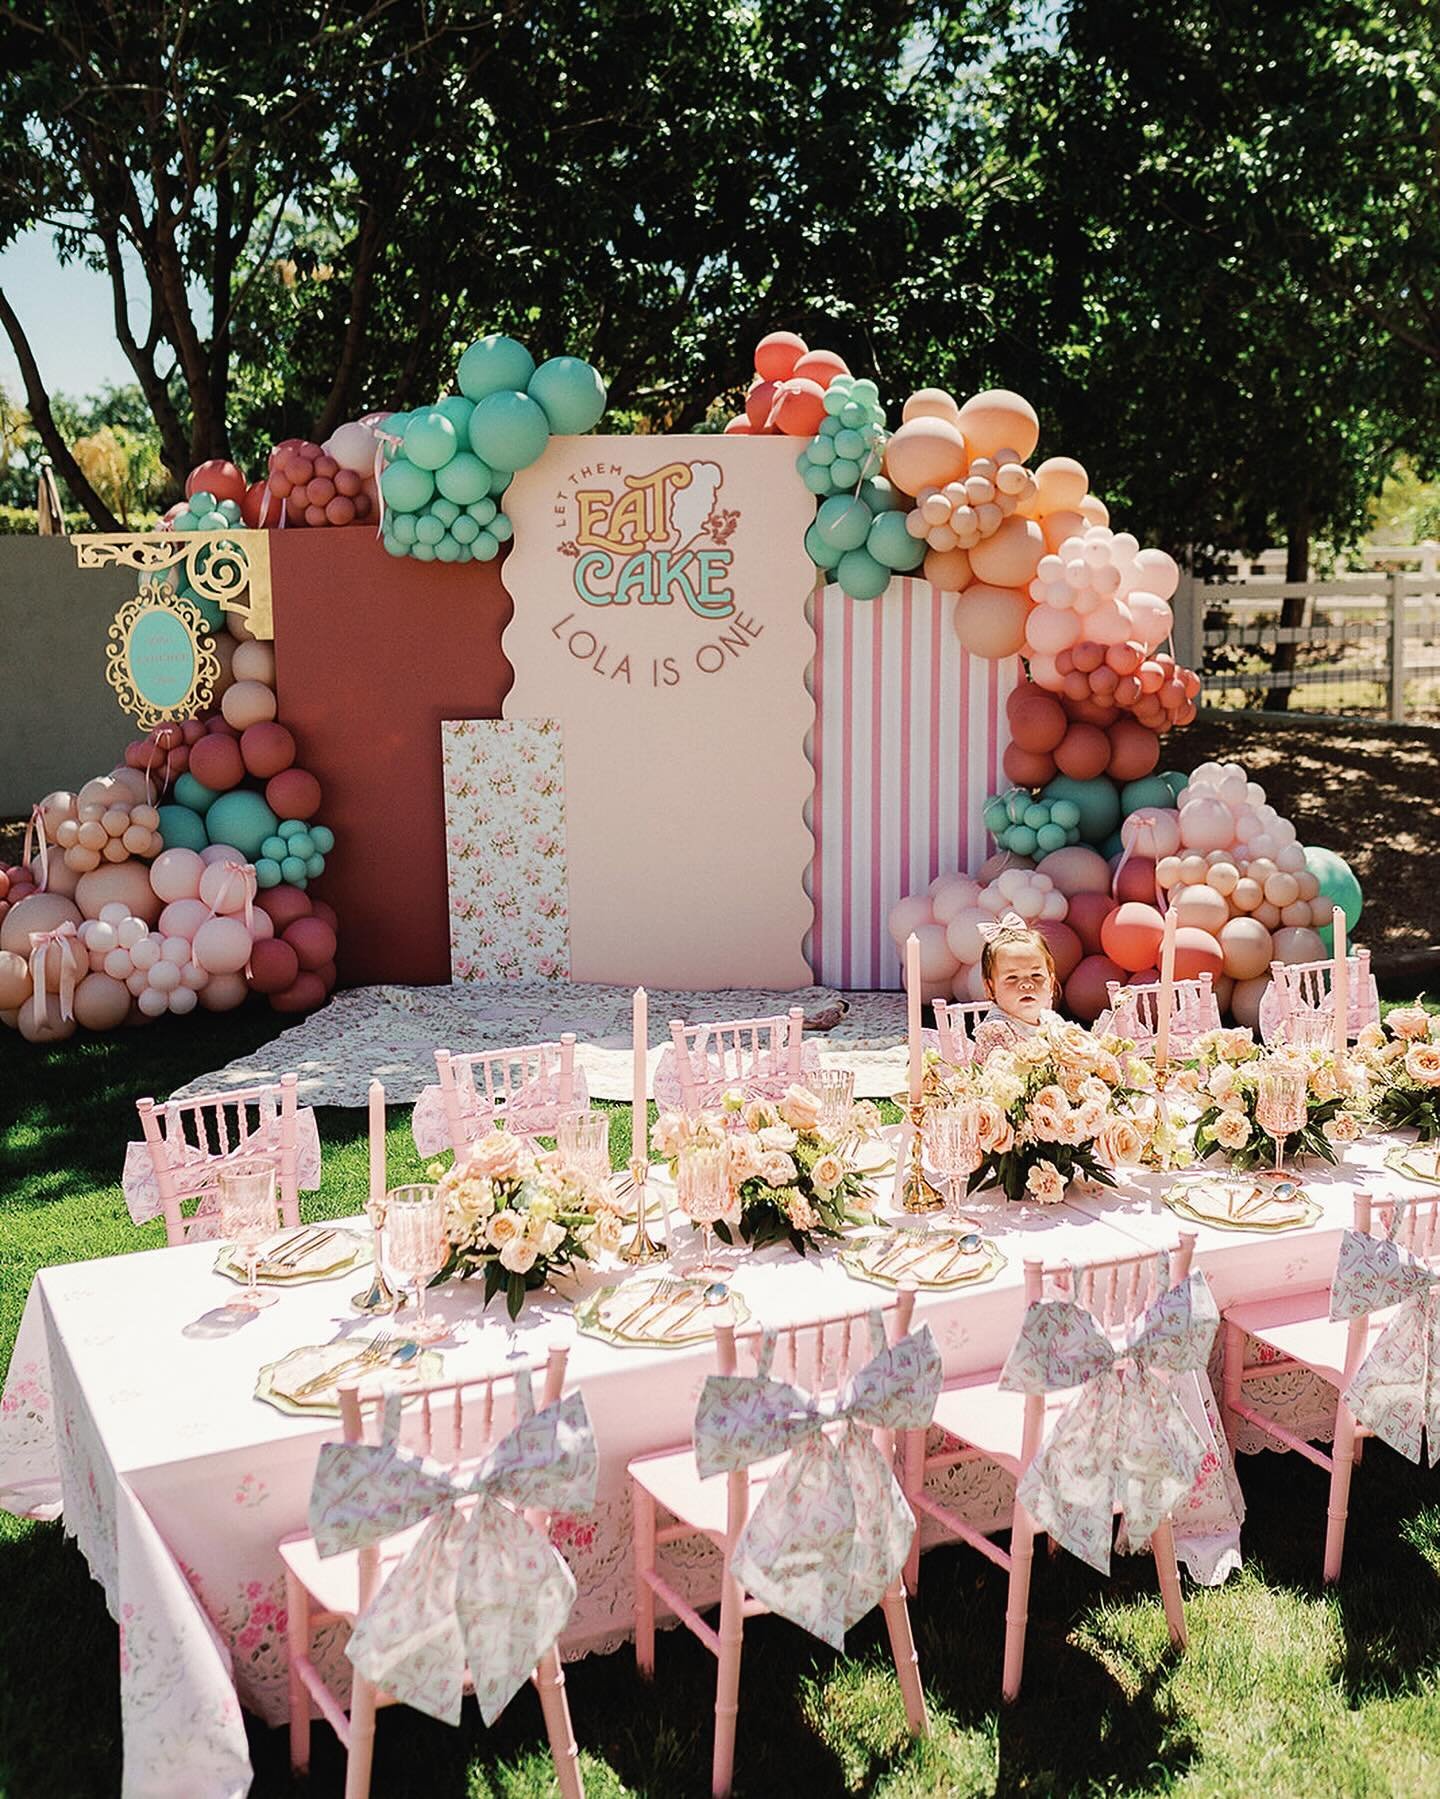 LET THEM EAT CAKE 🎀🤍🎂

The most beautiful celebration for sweet Lola Gold ✨

Our rentals used included:
-Candyland Pink Castle Combo
-8x8 White Ball Pit w/ Slide
-Lola Kids Chairs w/ Floral Bow Chairbackers and Jordan Kids Tables for the kid&rsquo